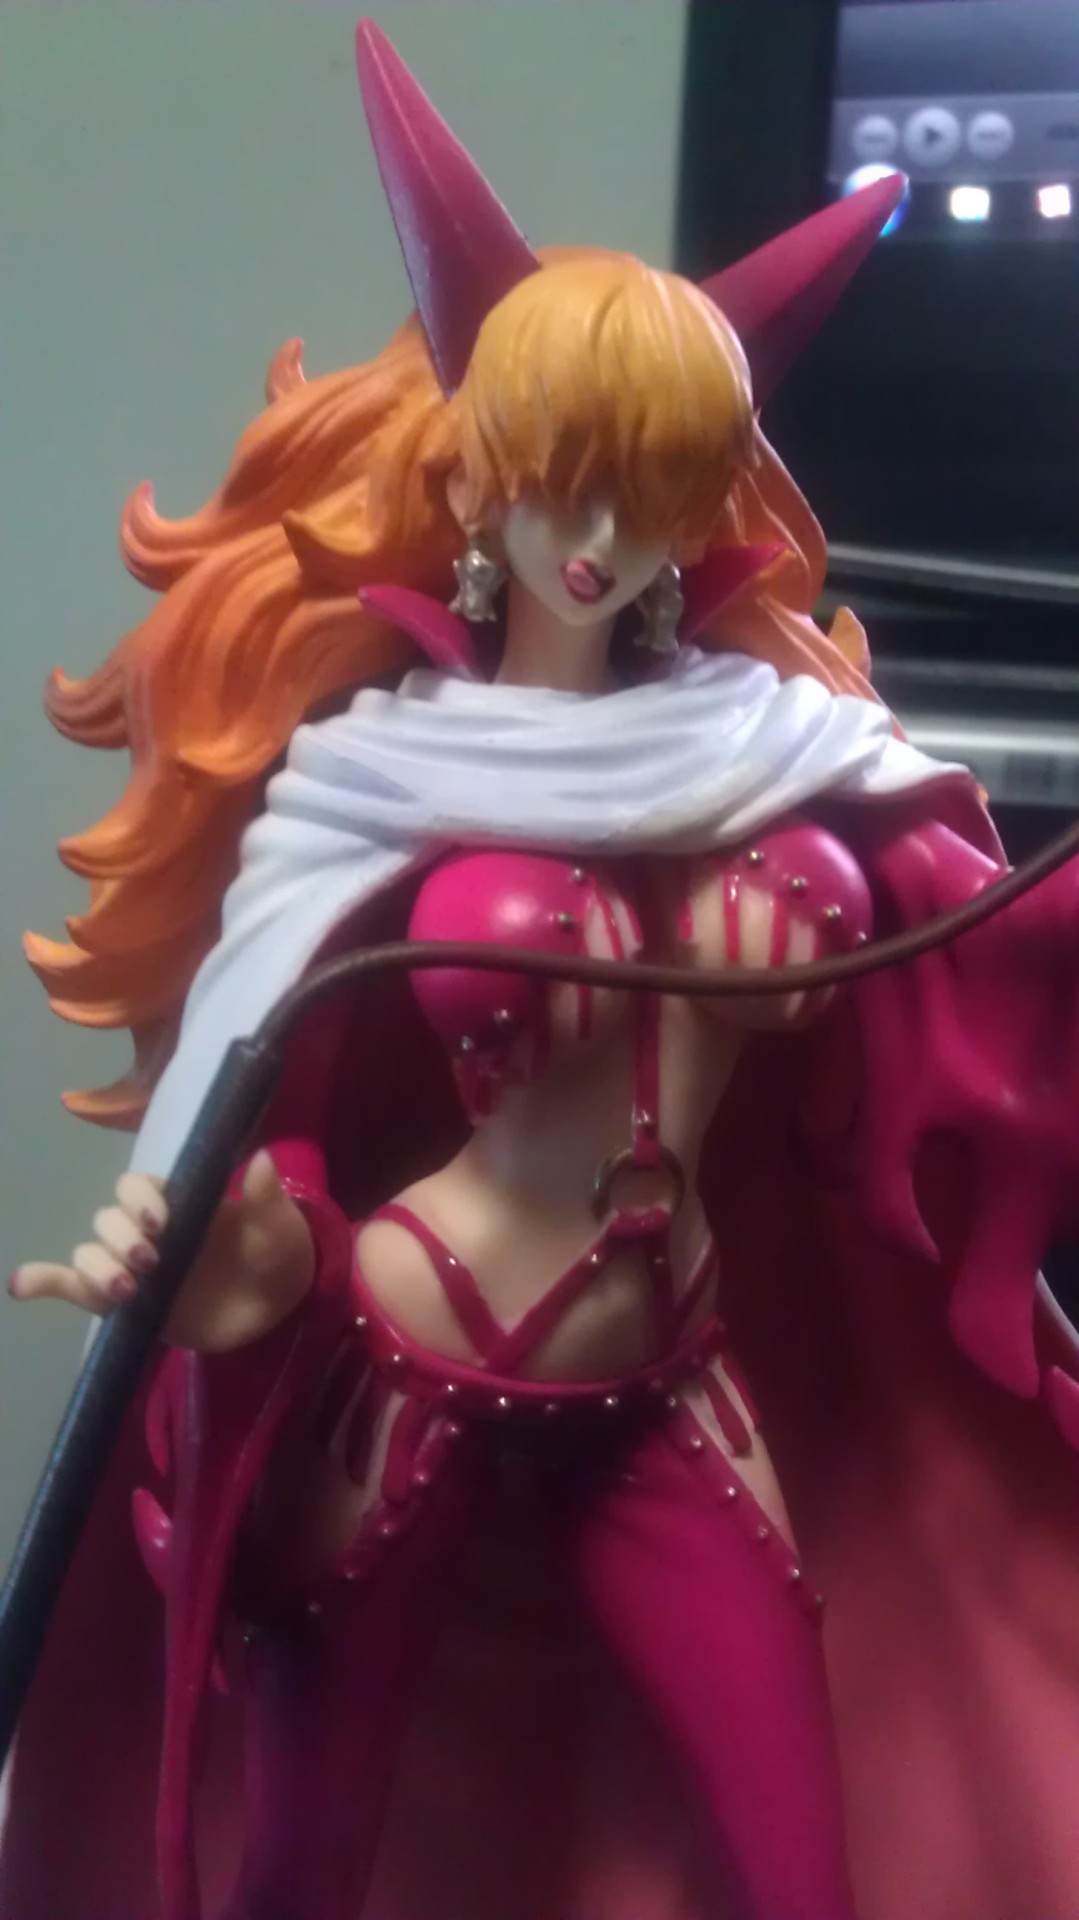 Got another figure today.  Dat Sadie.  I&rsquo;m not a big fan of One Piece